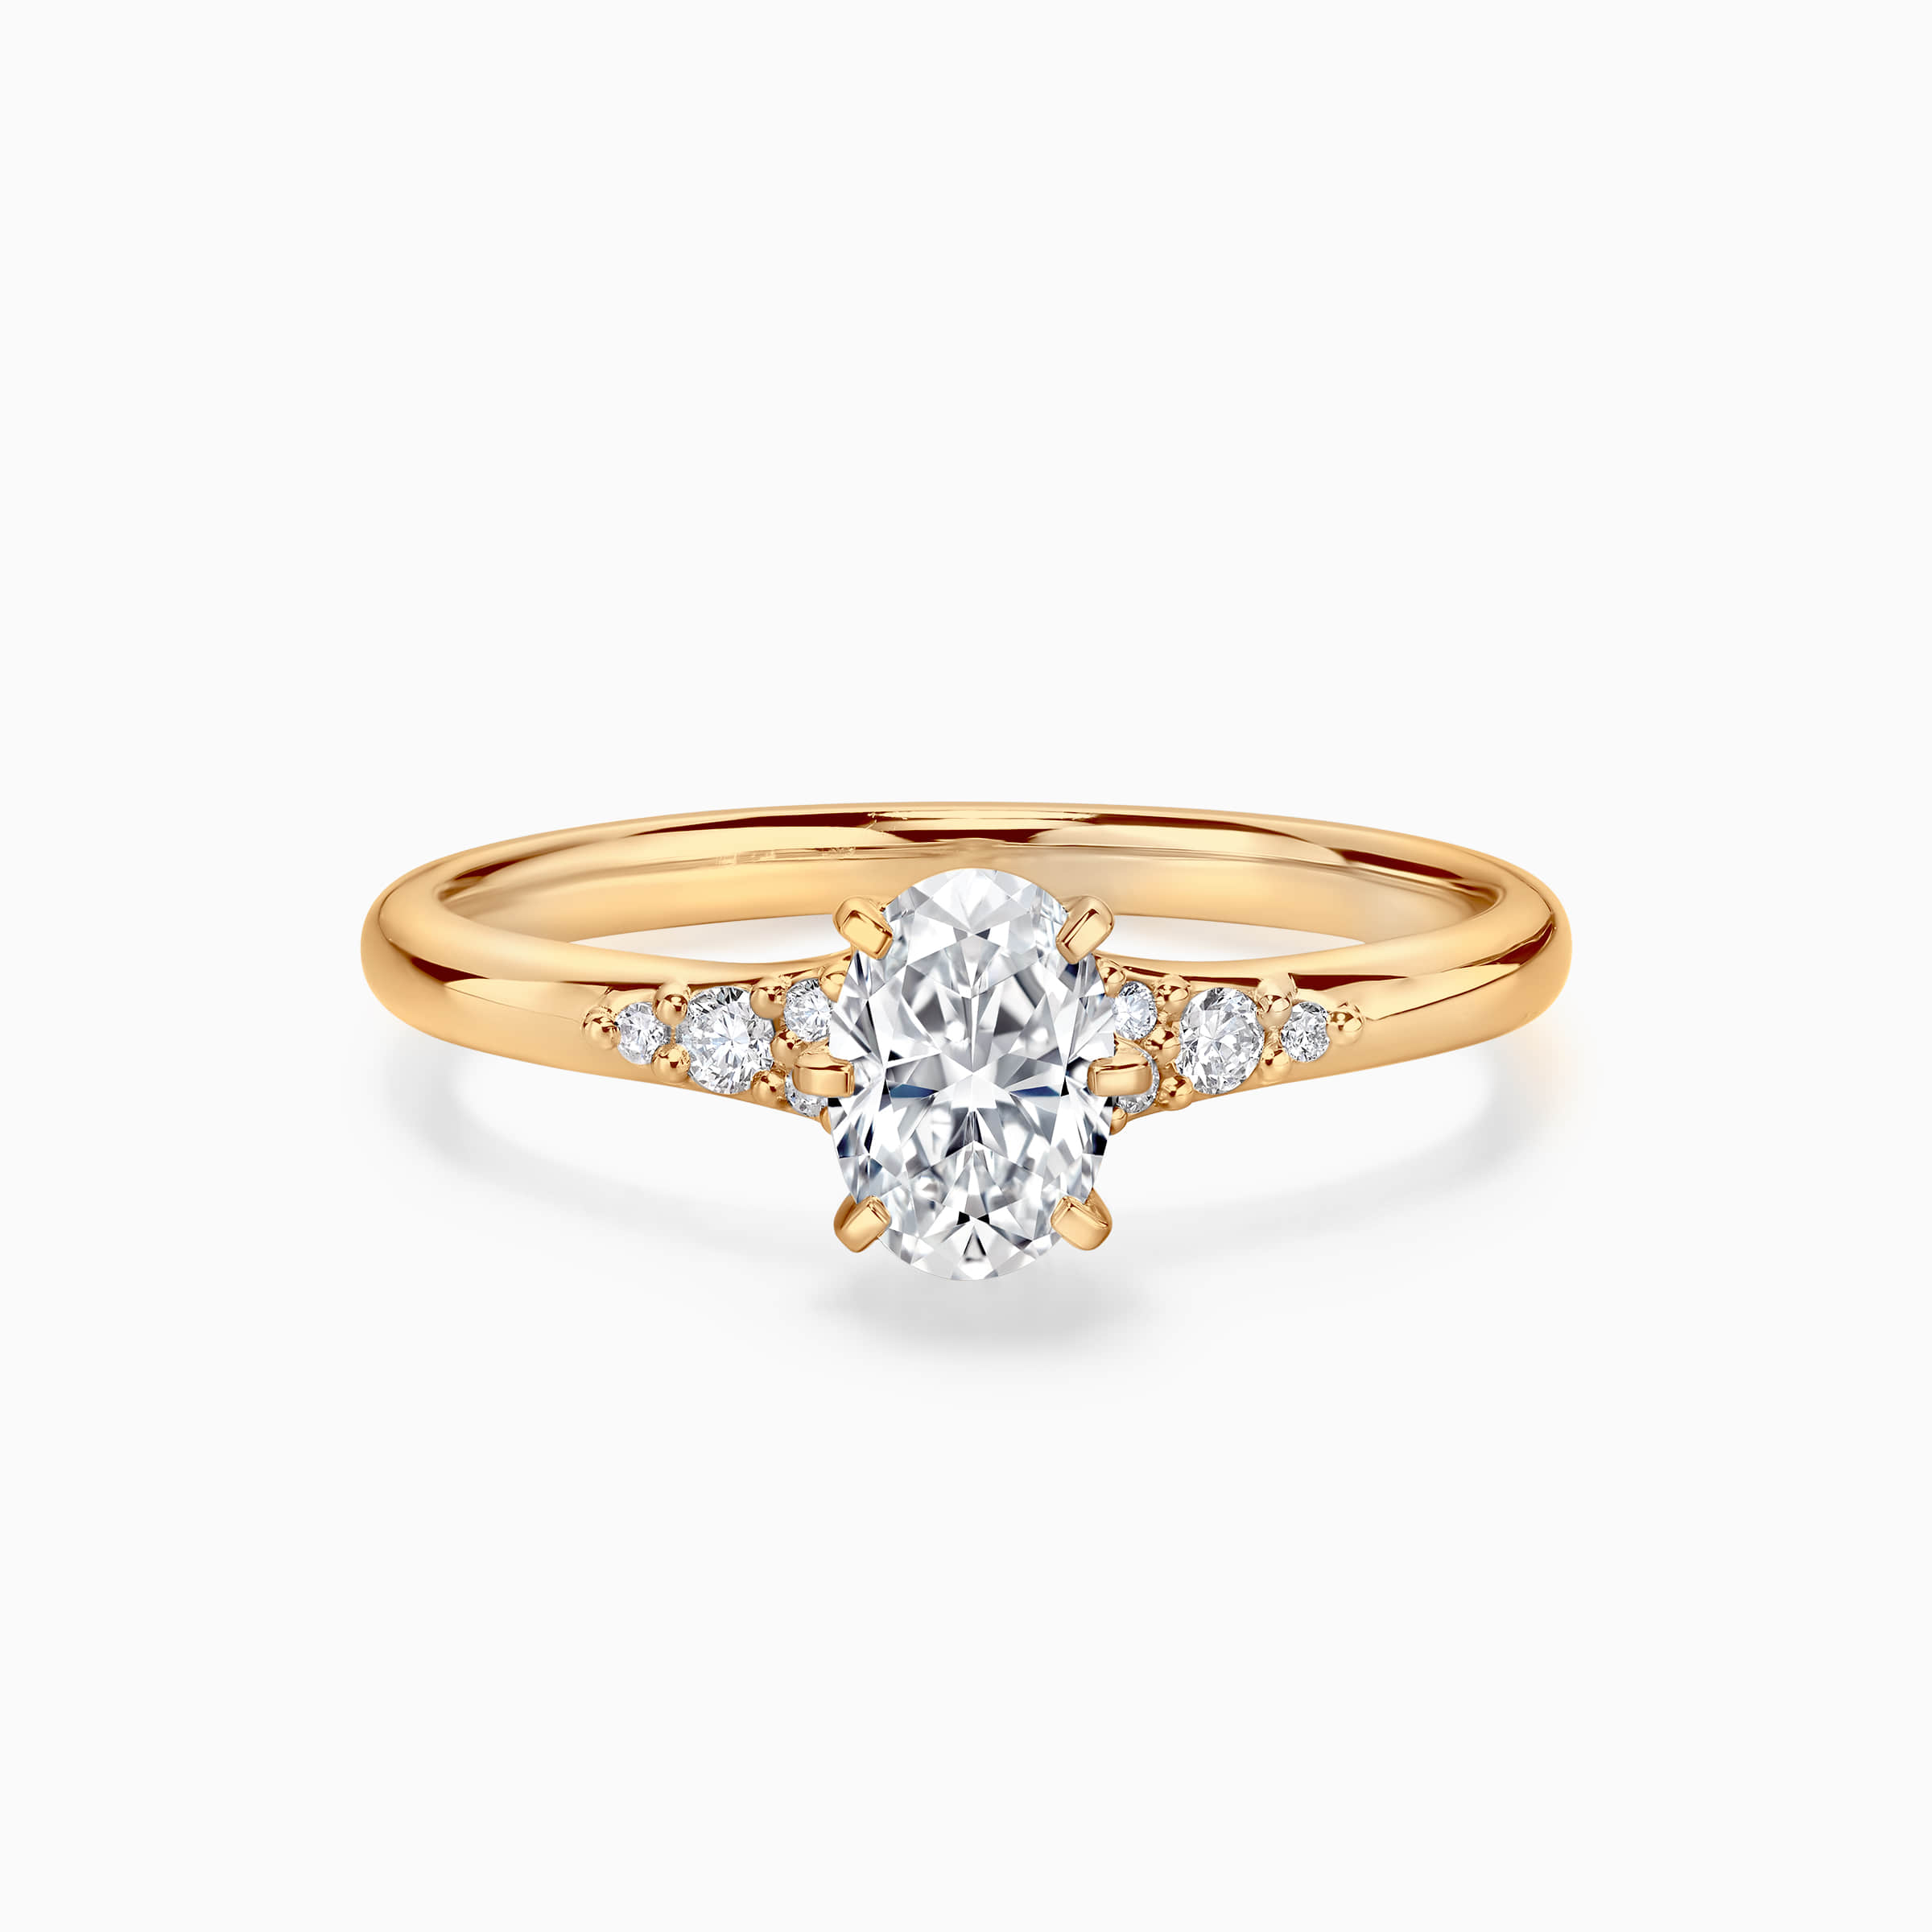 Darry Ring oval engagement ring in yellow gold